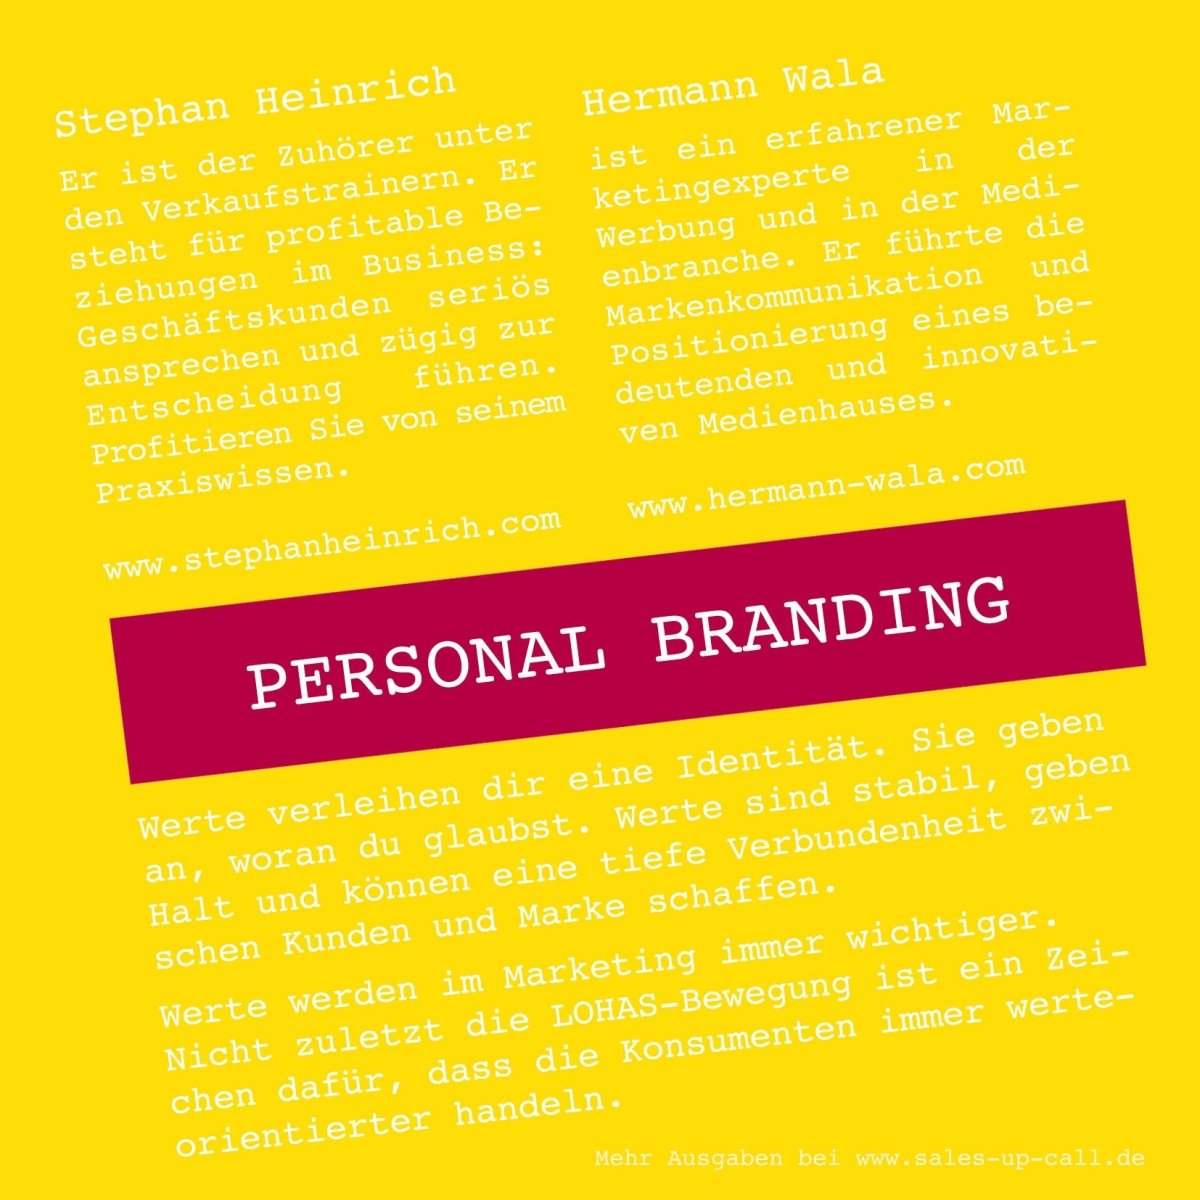 Personal Branding - Sales-up-Call - Stephan Heinrich